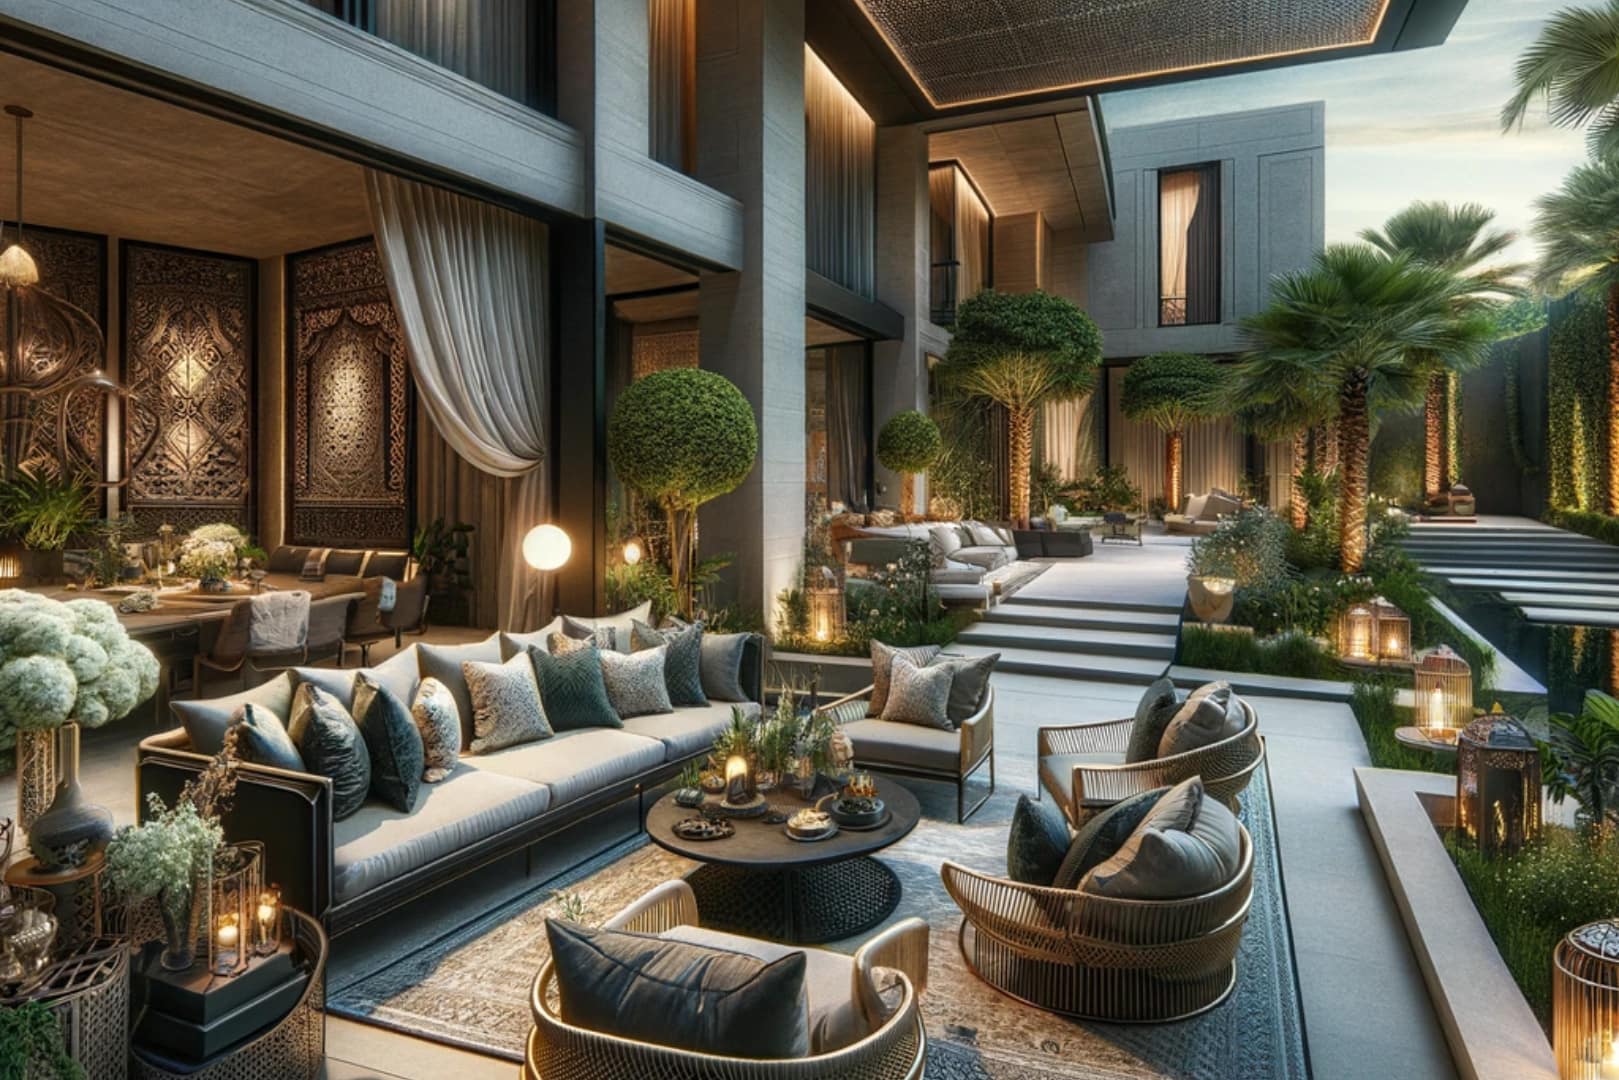 Luxurious outdoor living area in a high-end home, with plush seating, sophisticated decor, and a beautifully landscaped garden, embodying upscale outdoor elegance.